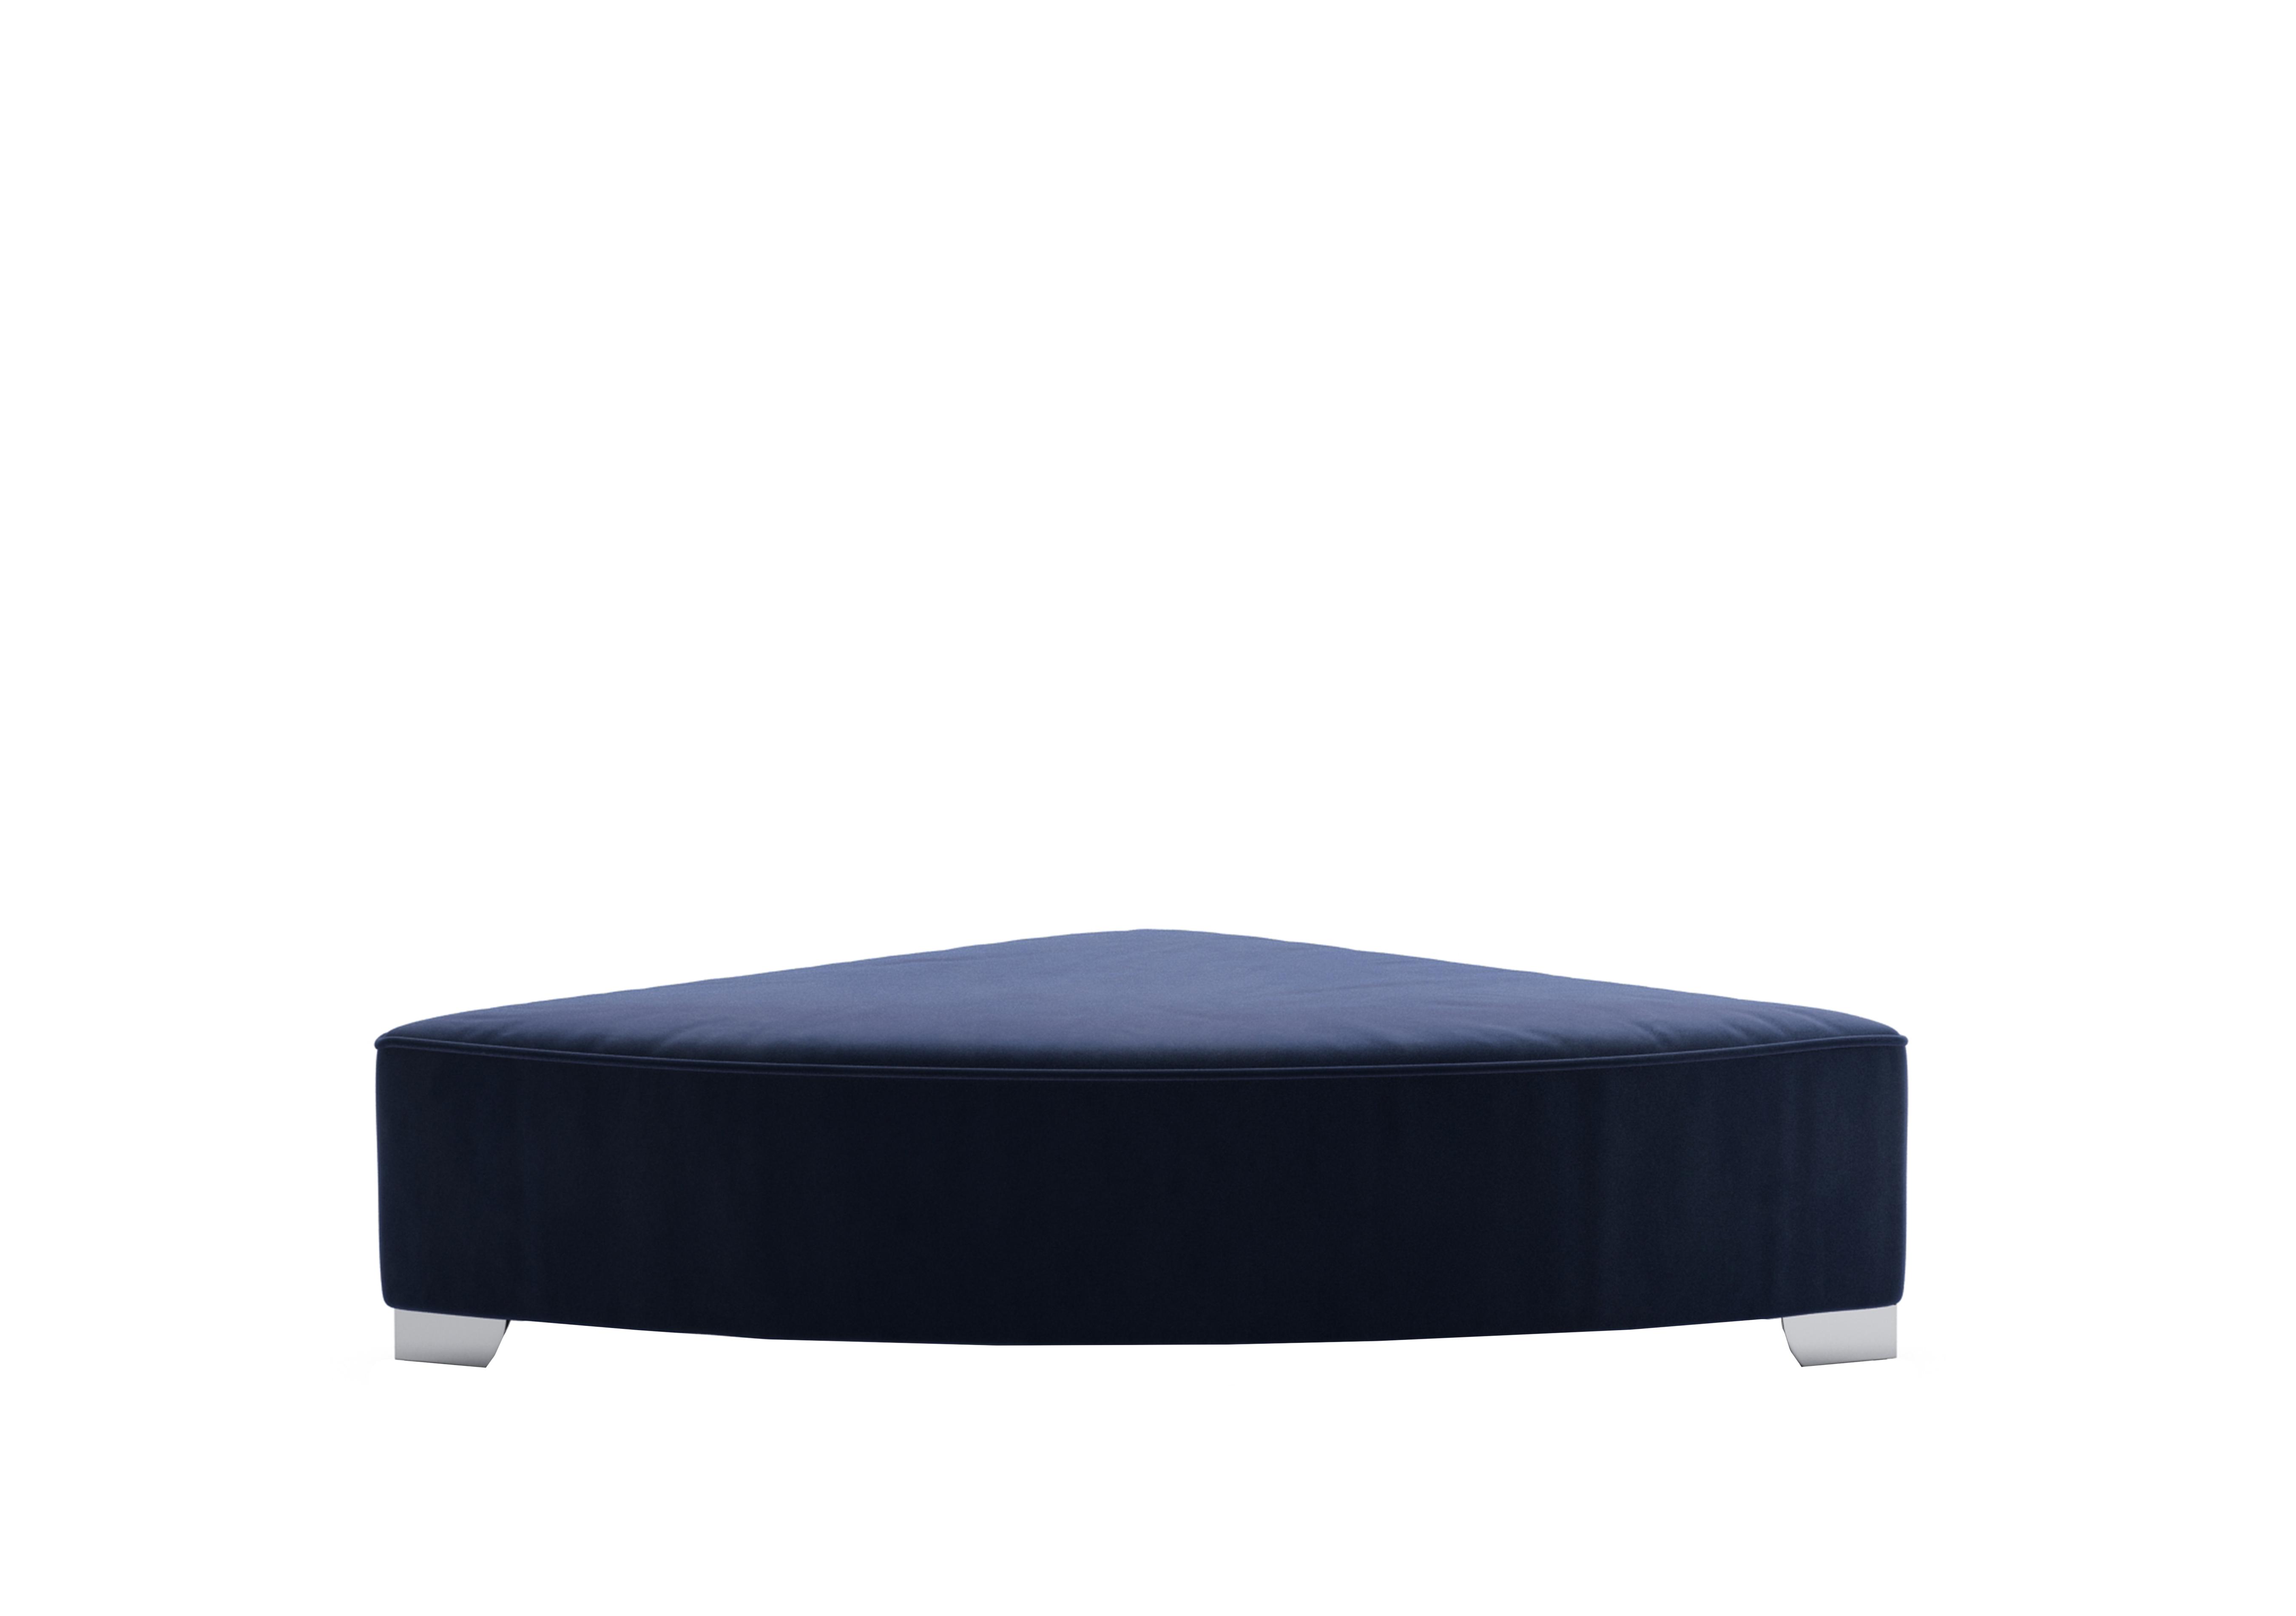 Isobel Fabric Wedge Footstool in Mid009 Midnight Indigo Ch Ft on Furniture Village